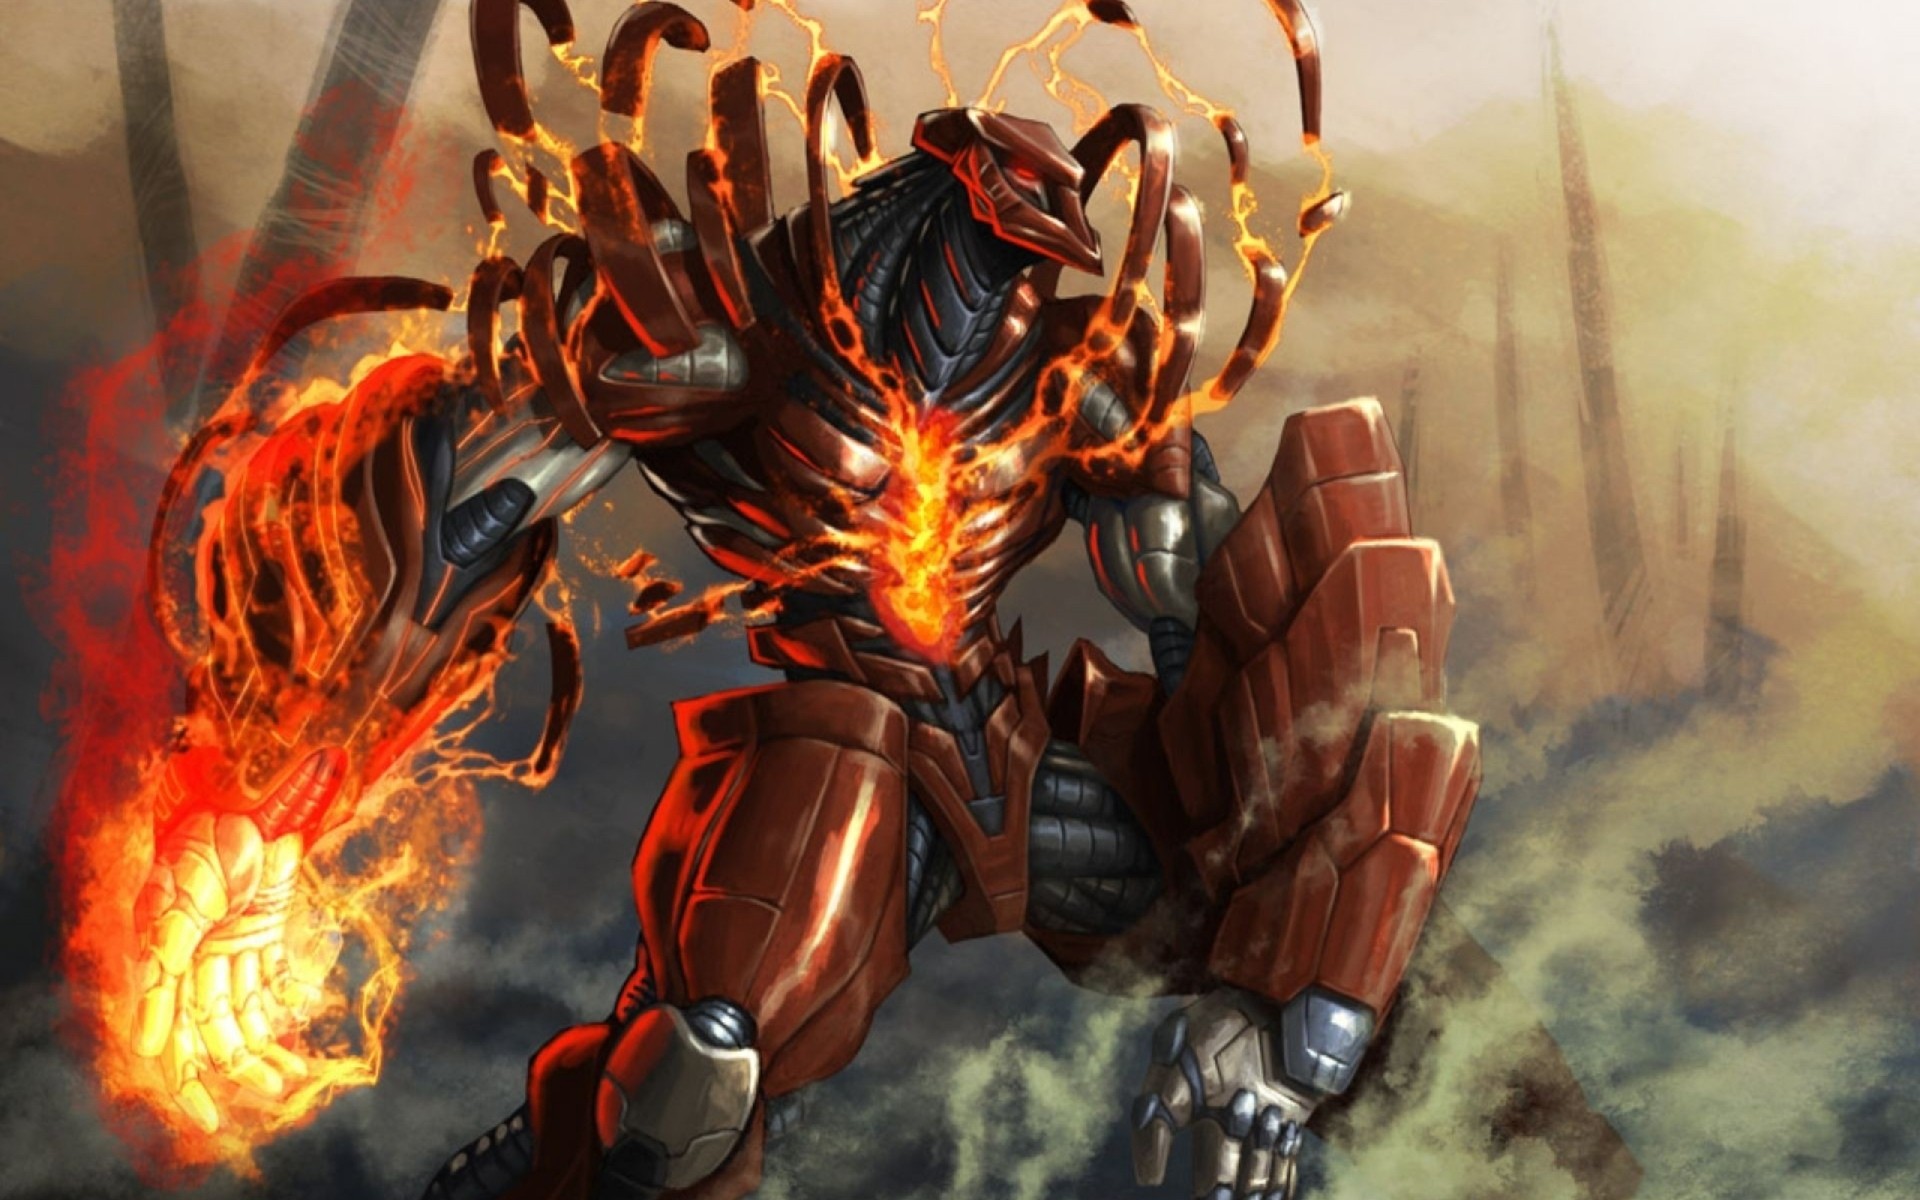 awesome anime wallpapers,action adventure game,pc game,cg artwork,fictional character,mecha